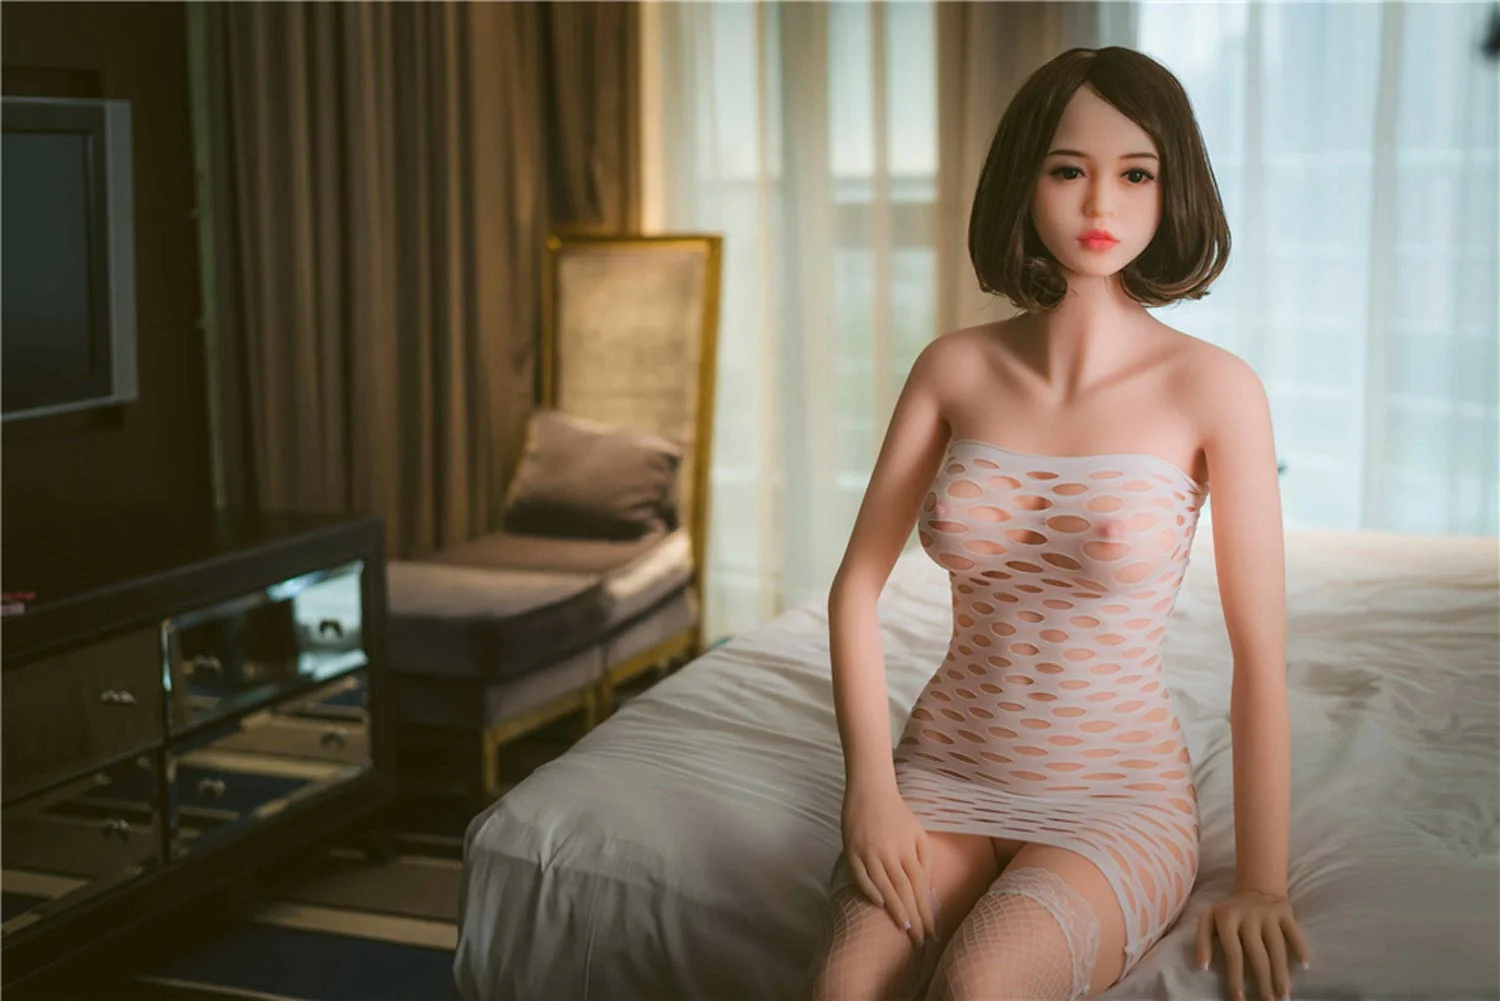 Sex doll sitting on the bed with hands on thighs